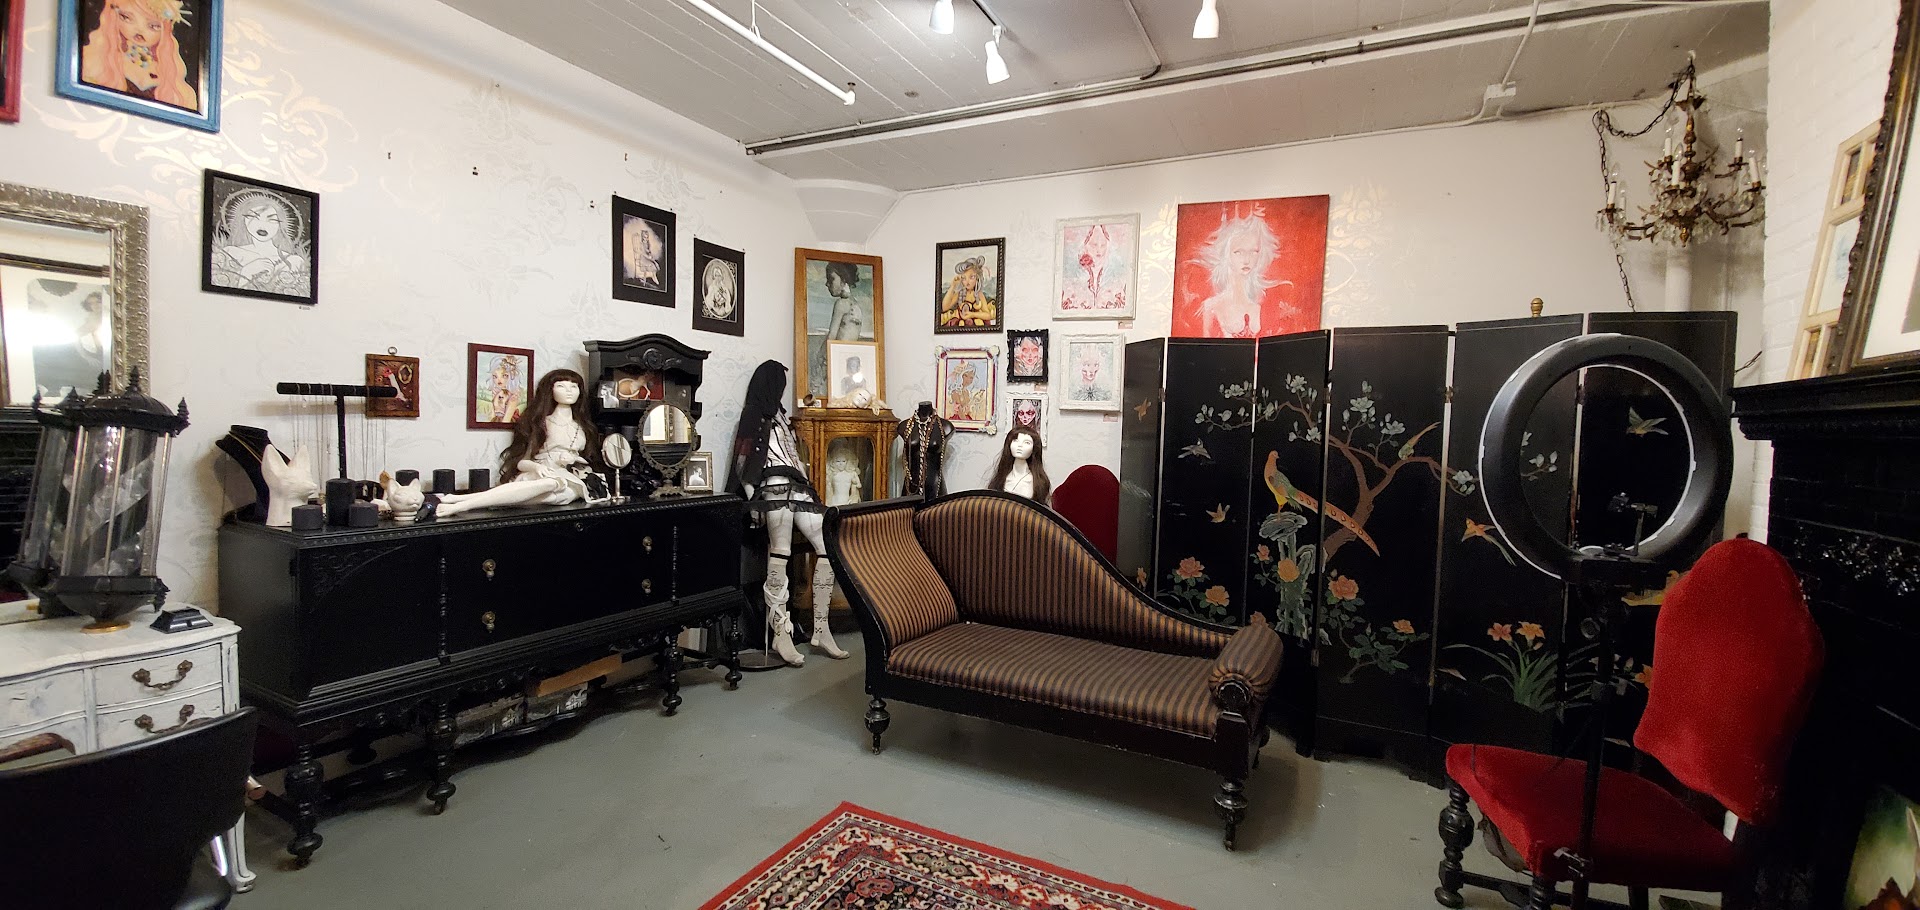 Wild Hare Salon and Gallery